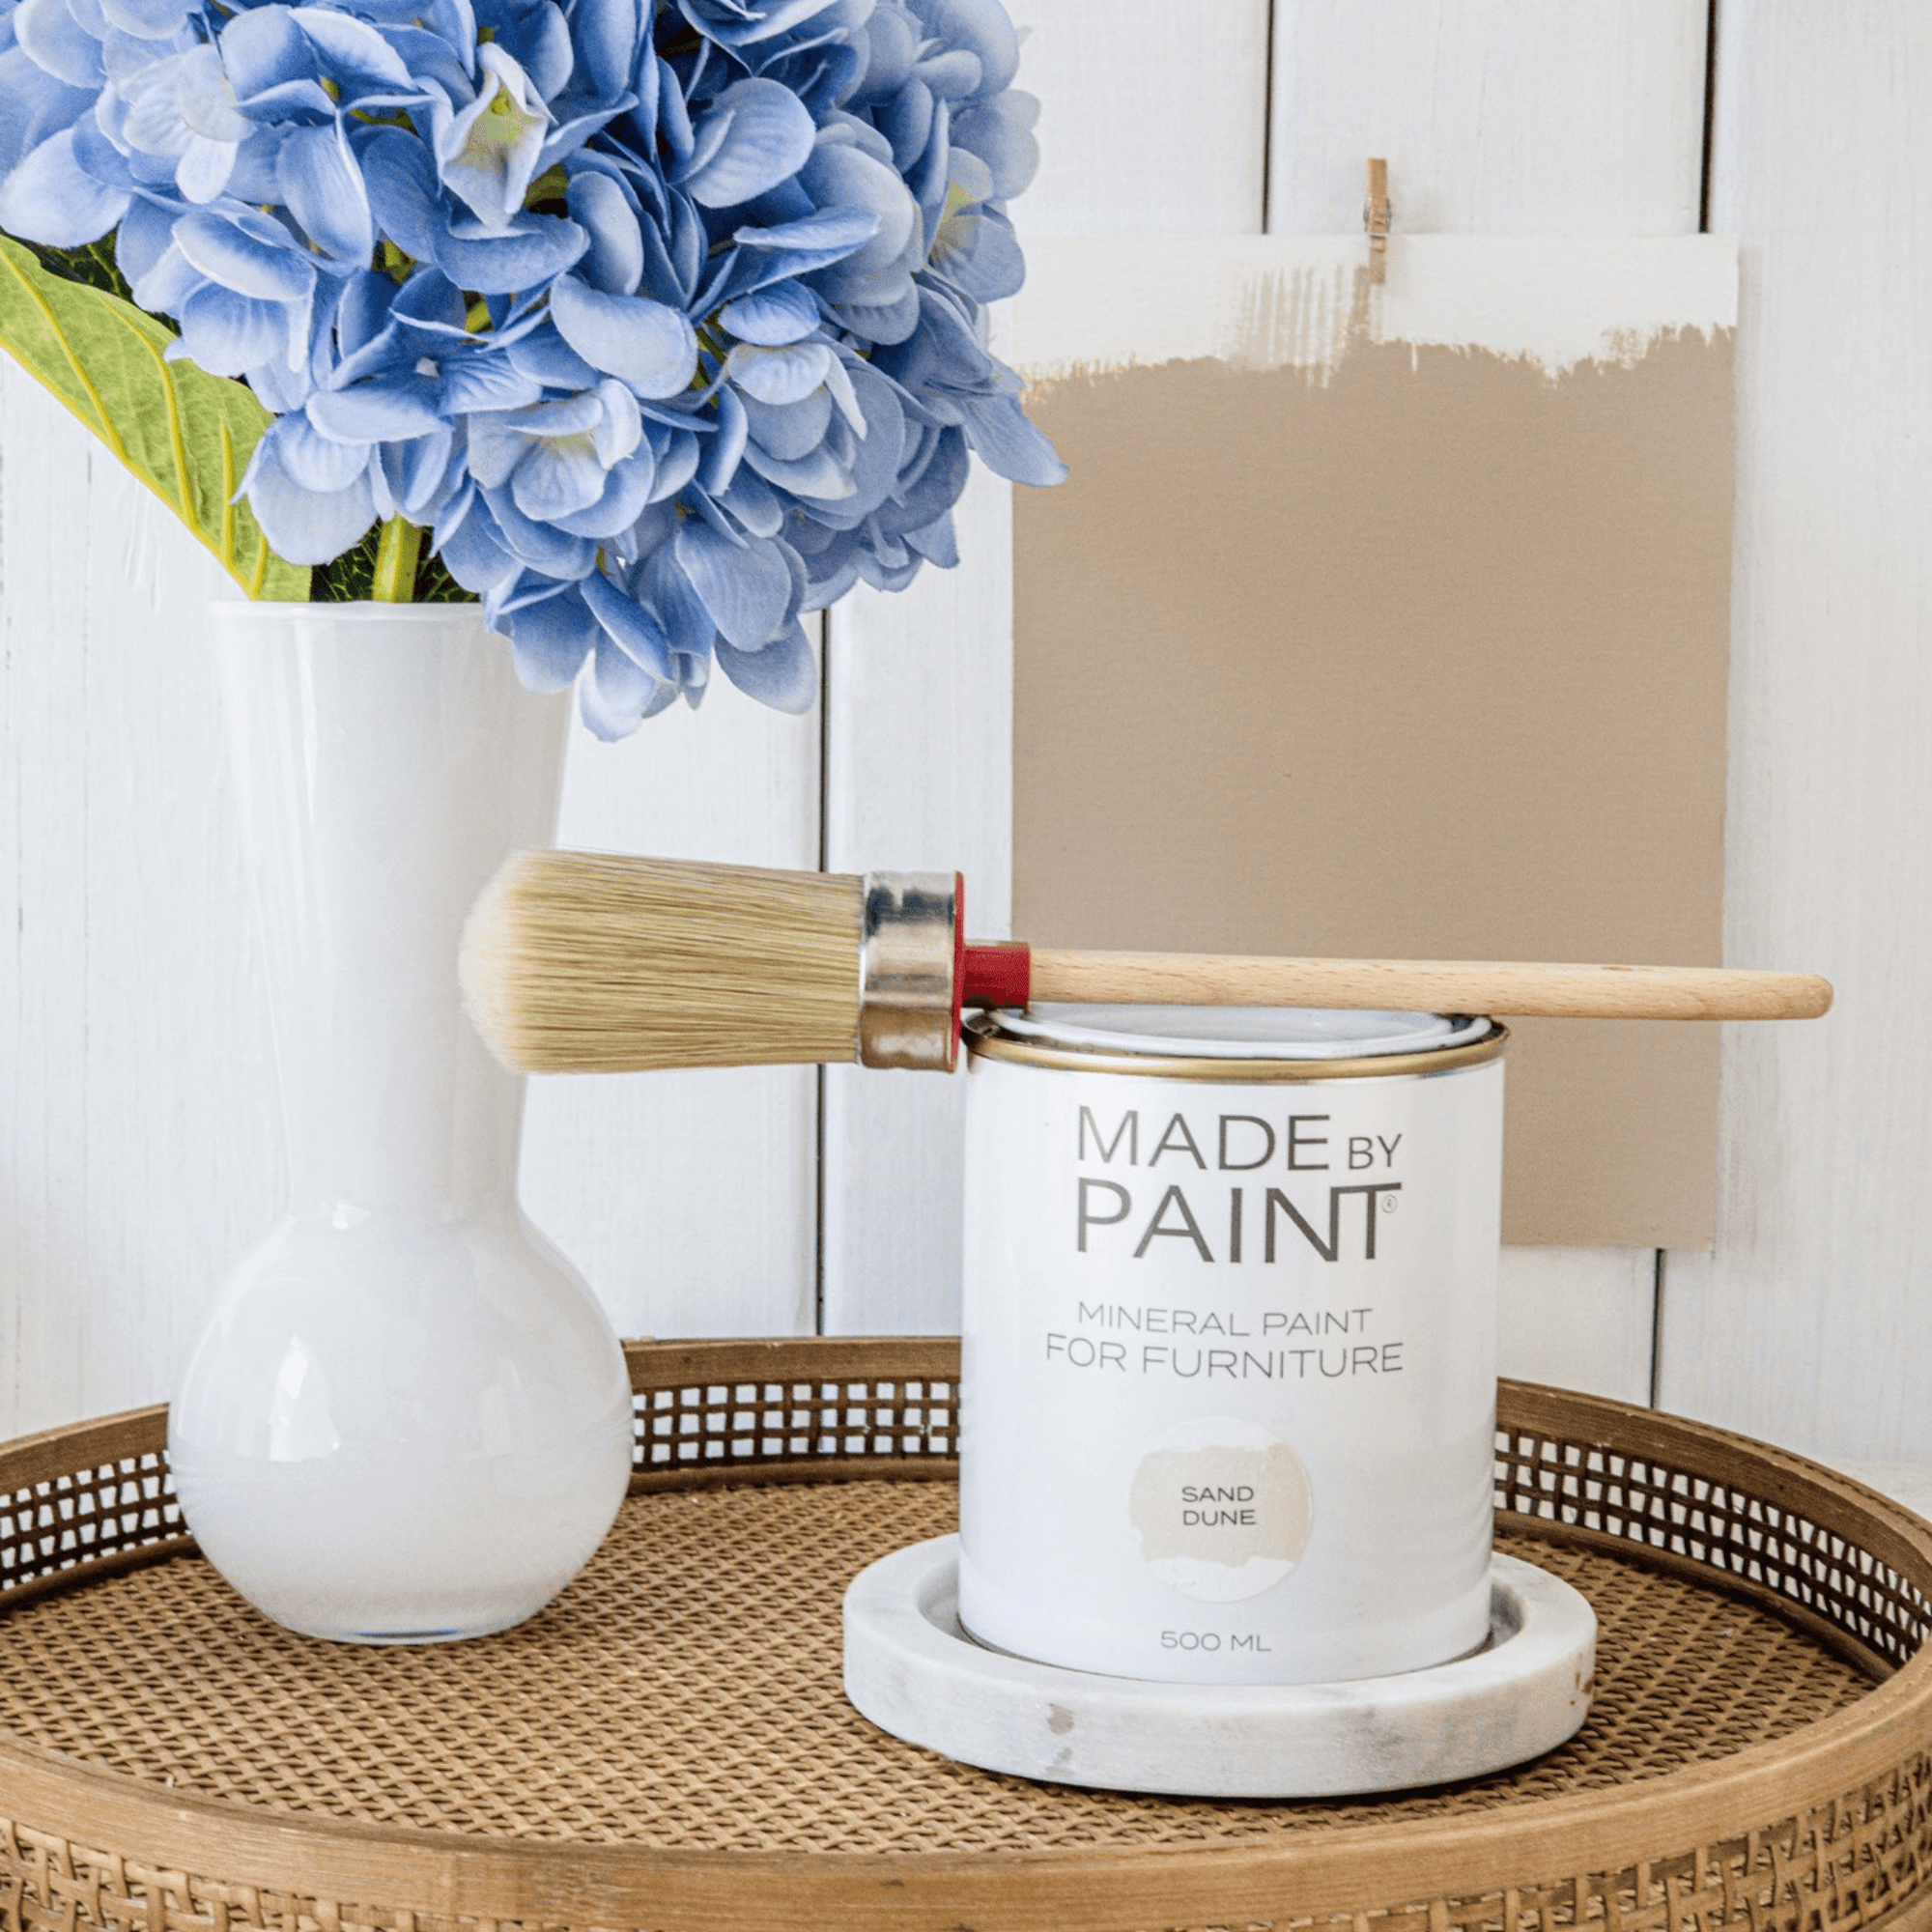 'Sand Dune' Mineral Paint, Made By Paint, 500ml (Light Tan)